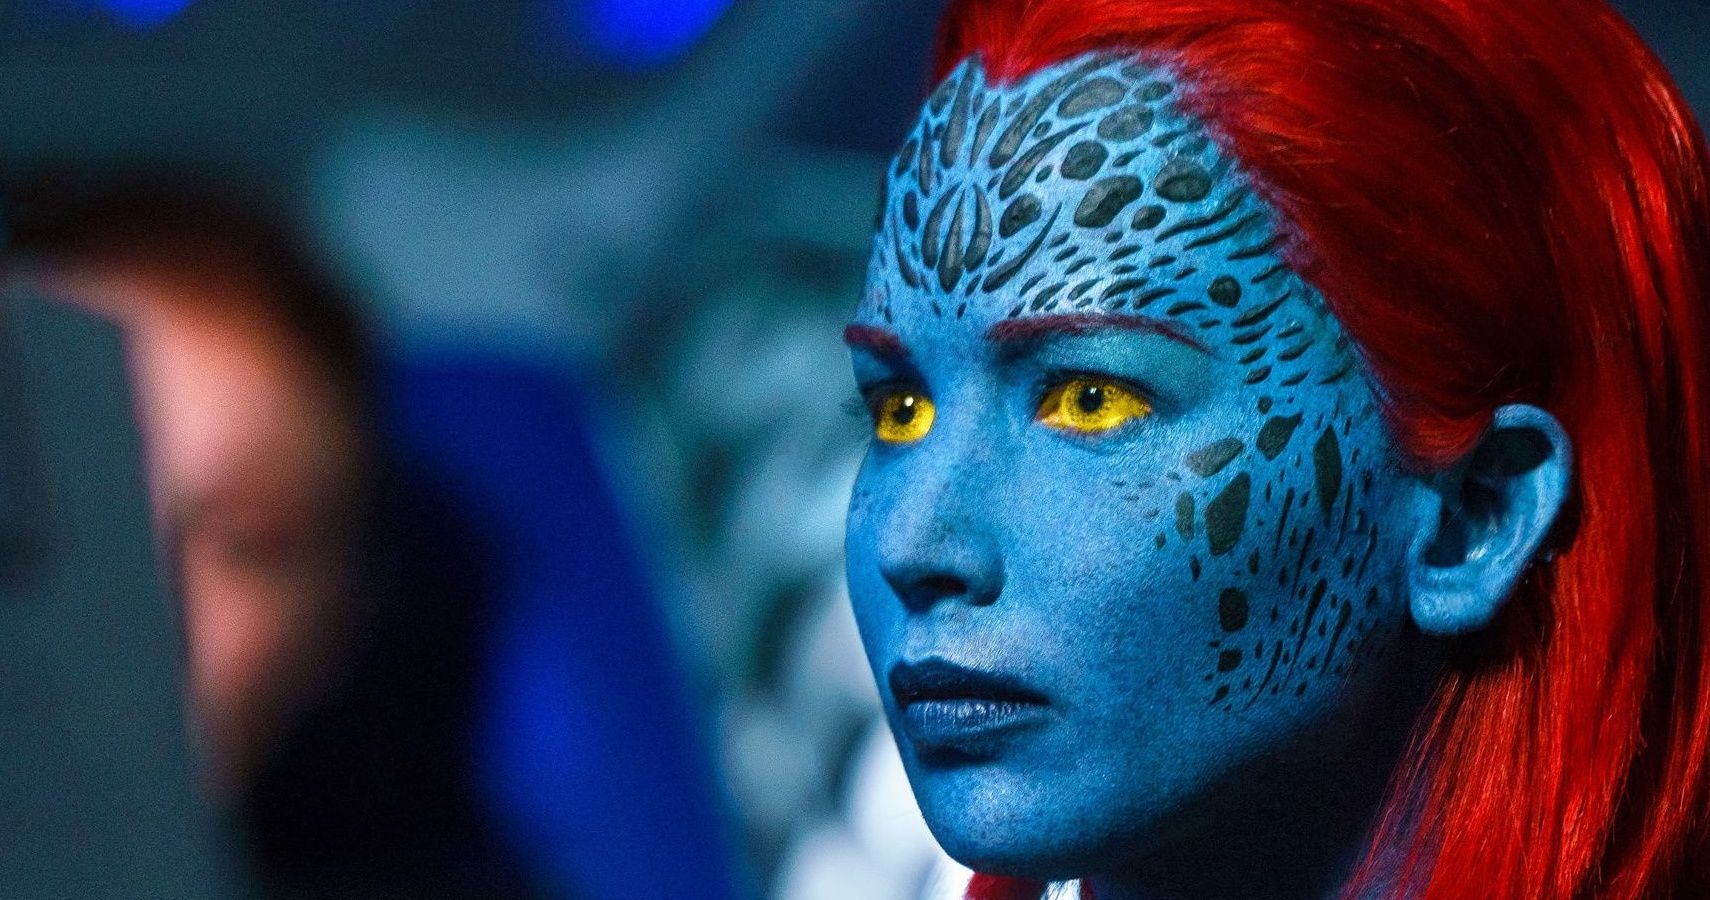 Jennifer Lawrence as Mystique, looking at someone off camera in her natural form.